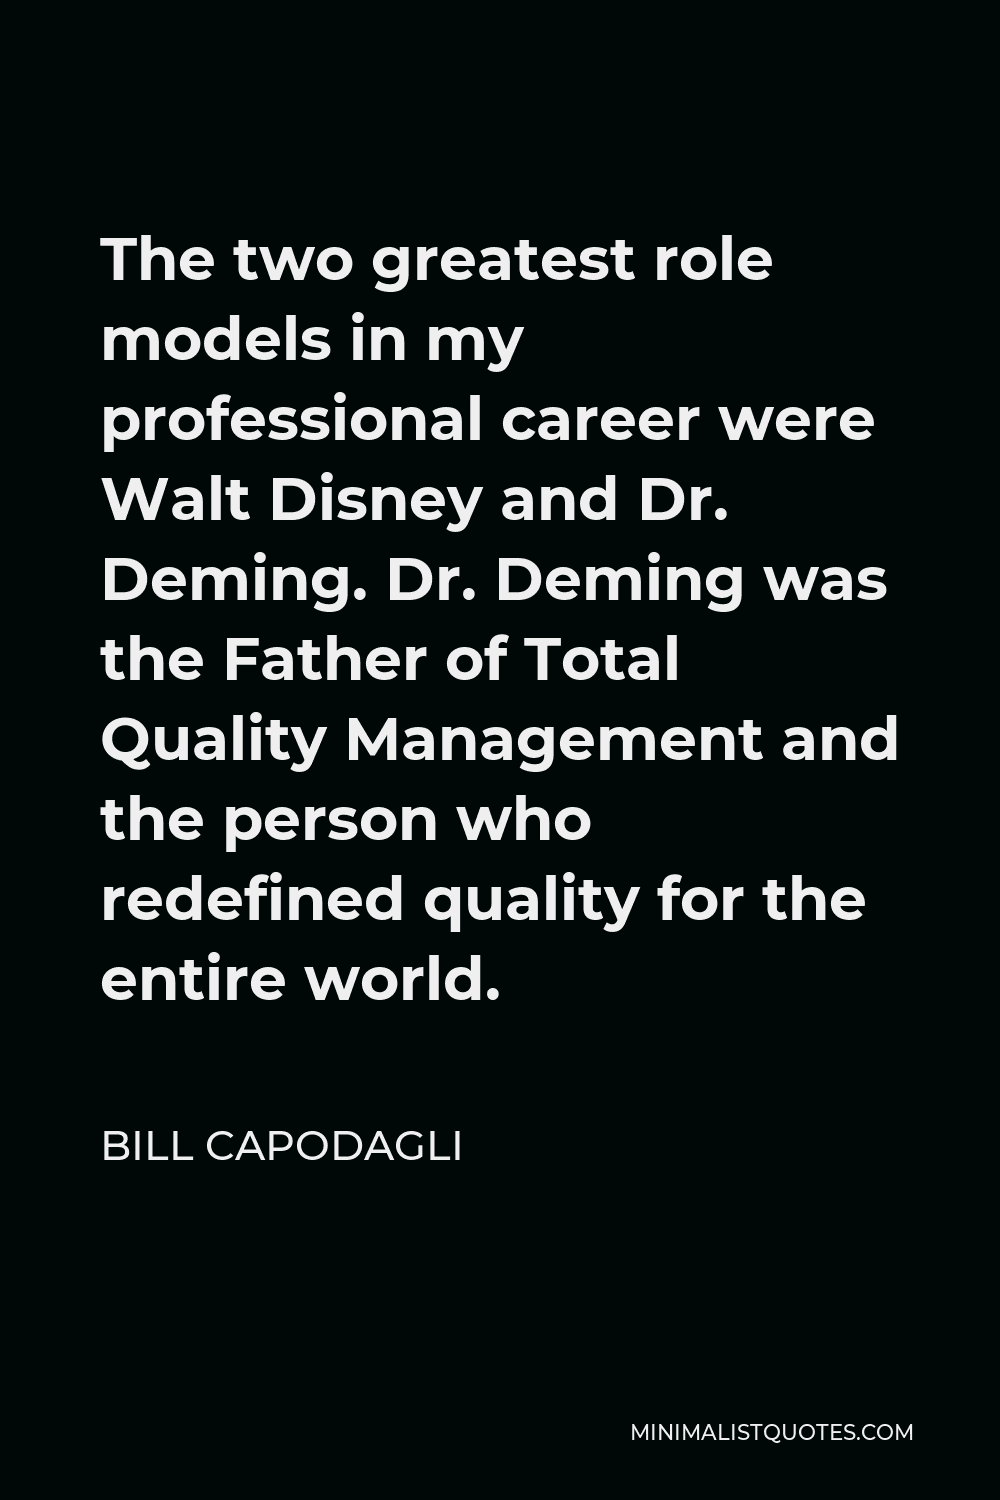 Bill Capodagli Quote - The two greatest role models in my professional career were Walt Disney and Dr. Deming. Dr. Deming was the Father of Total Quality Management and the person who redefined quality for the entire world.